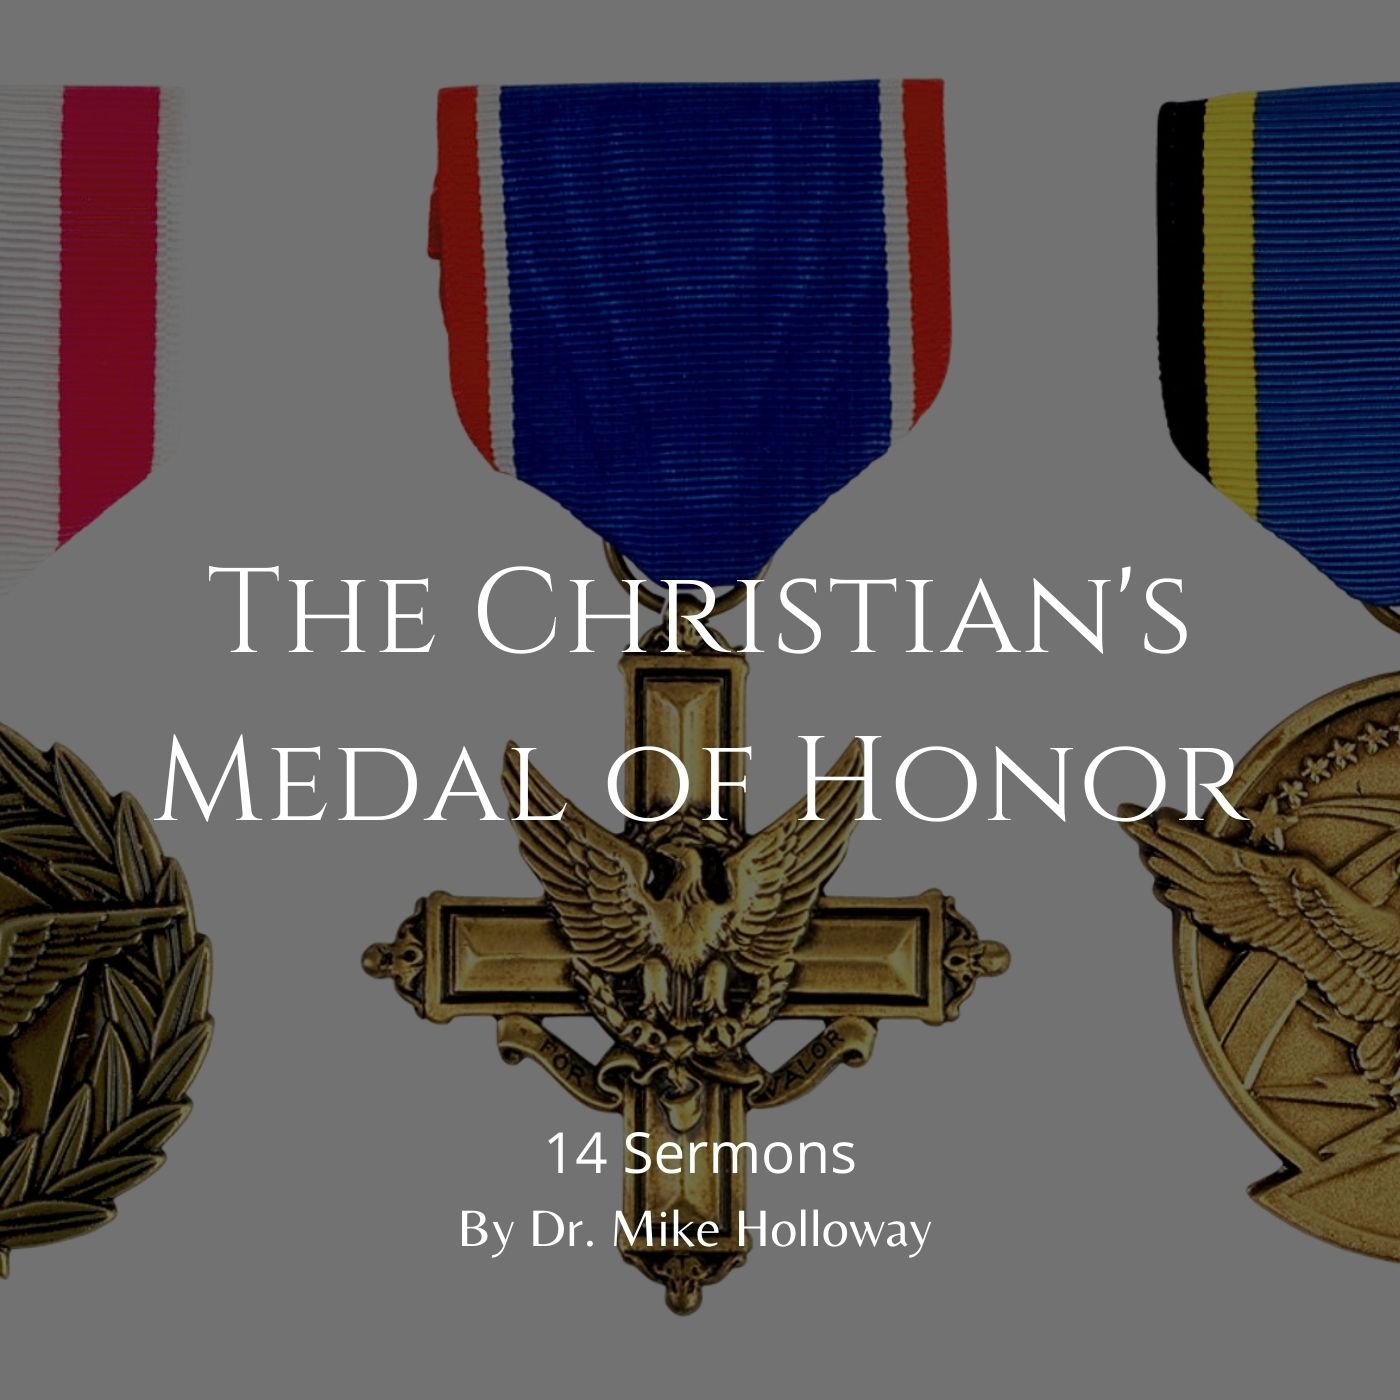 The Christian’s Medal of Honor